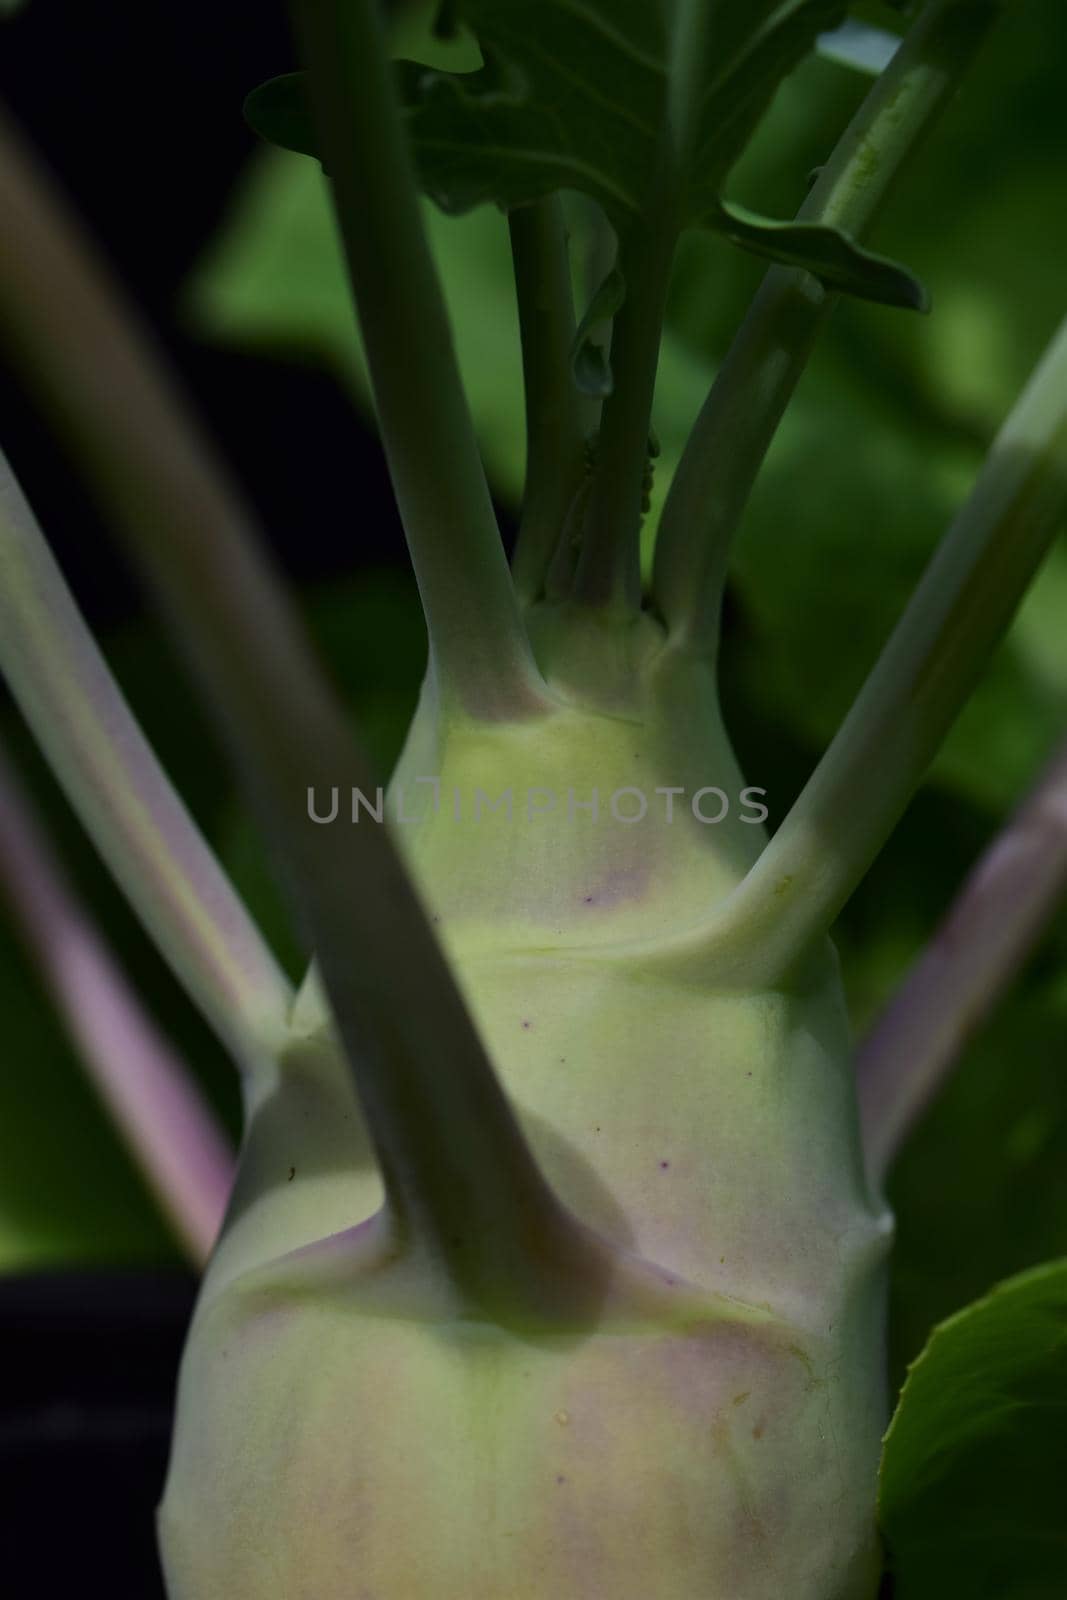 Pear shaped kohlrabi as a close up by Luise123